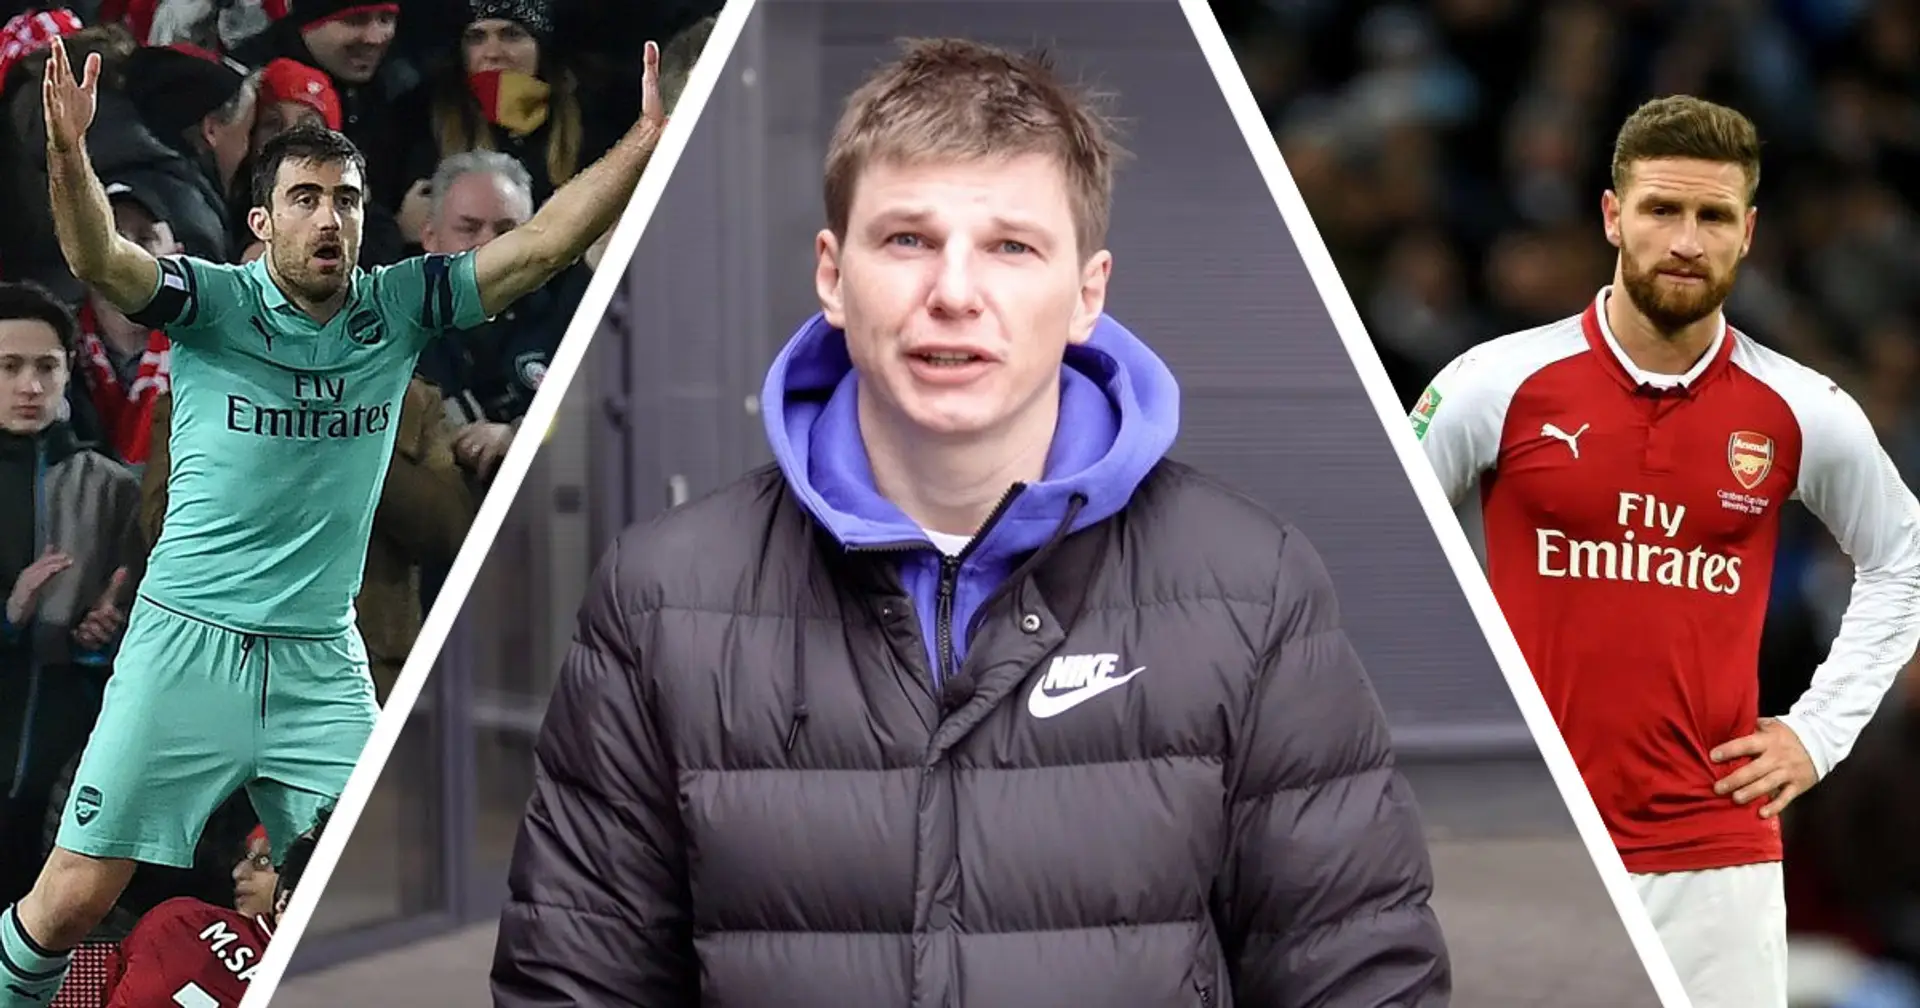 Arshavin does not understand why Arsenal can't fix defensive issues: 'I don’t know why this doesn’t change'